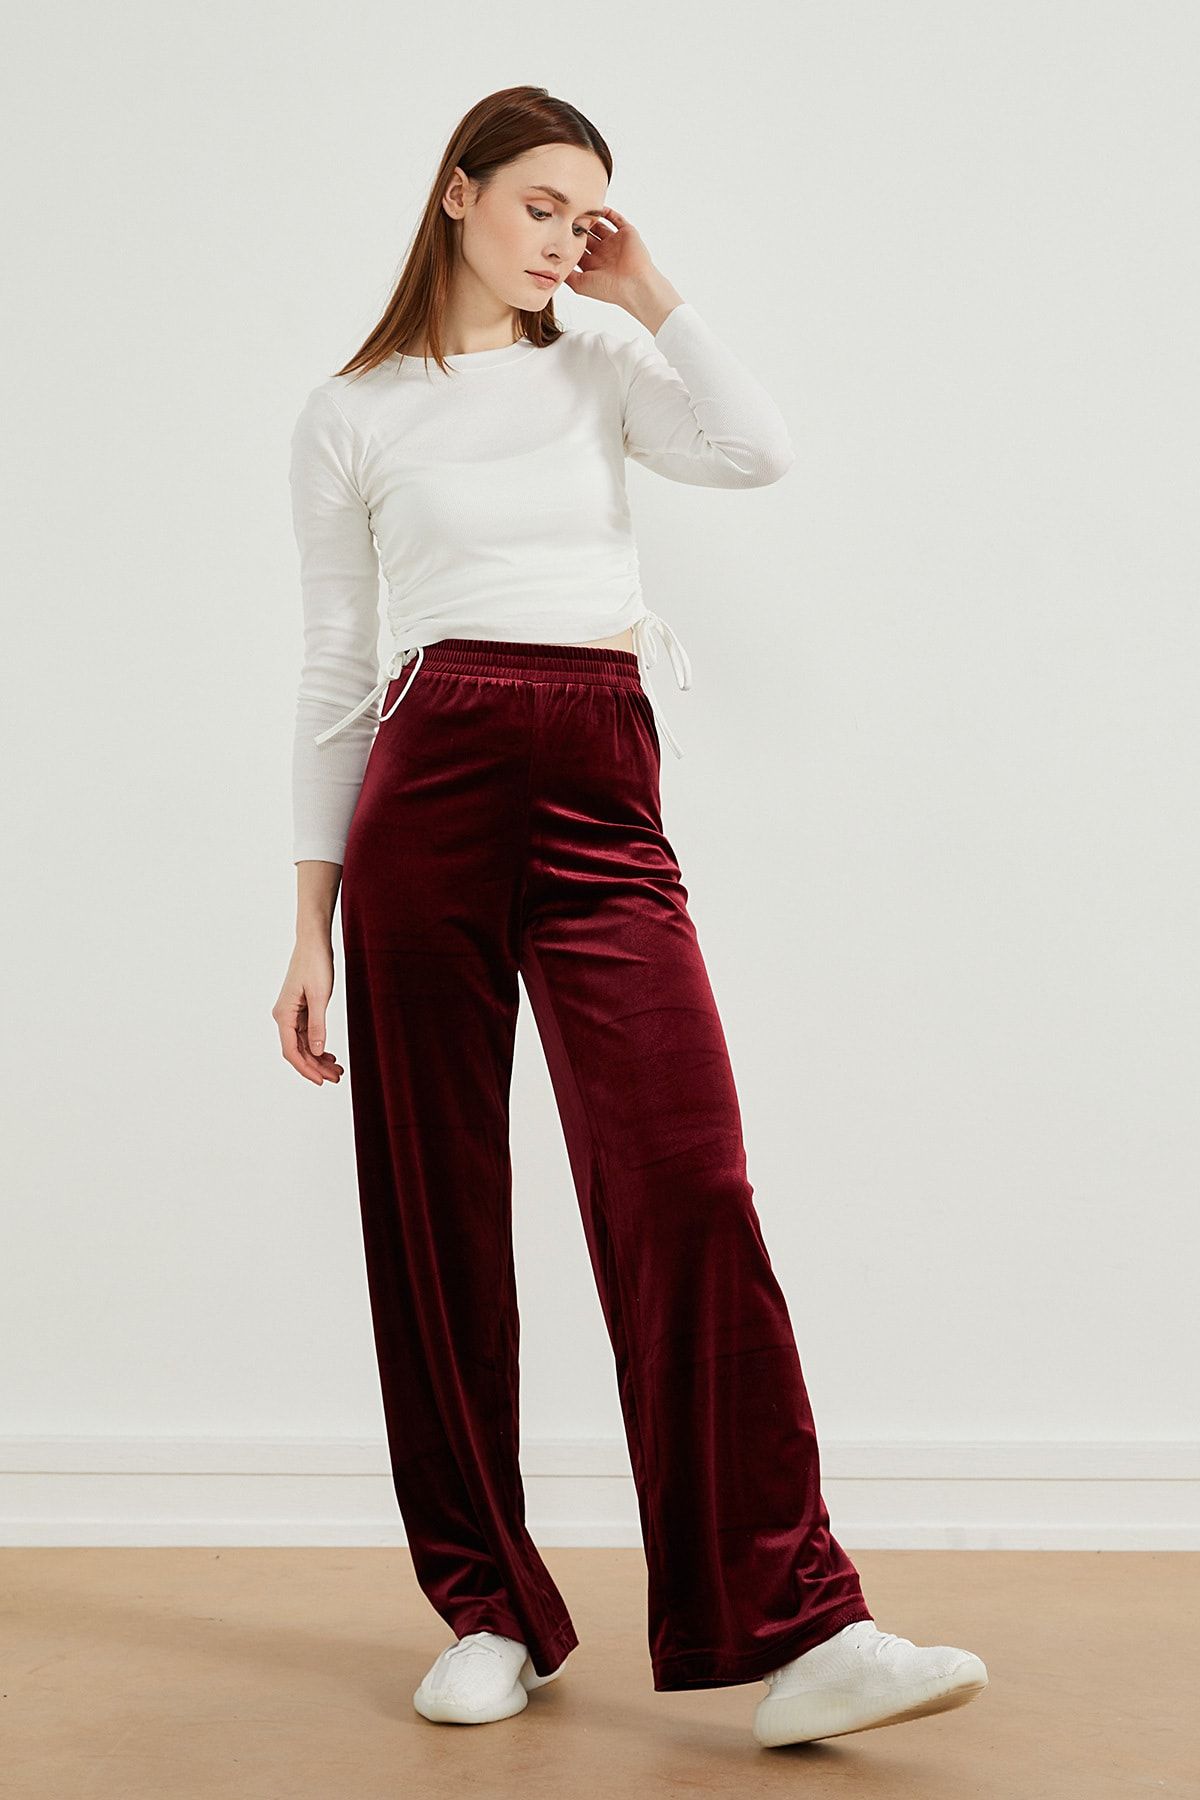 BURGUNDY CARGO PANTS - P11816 – MADE BY SOCIETY COM